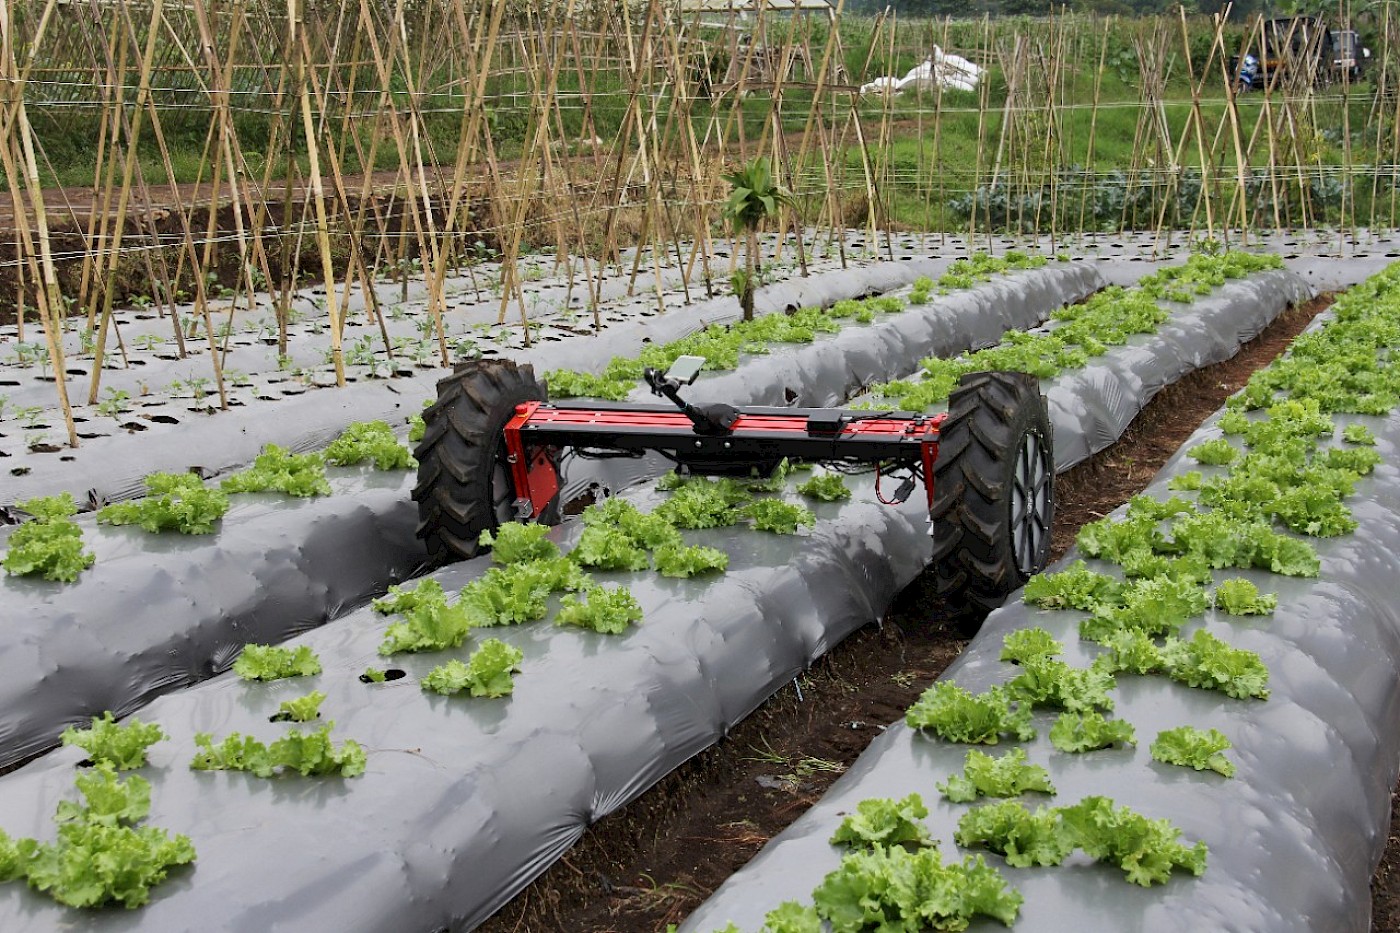 [Source](https://sydney.edu.au/engineering/news-and-events/2017/01/06/the-future-of-farming-agribots-leading-the-revolution.html)